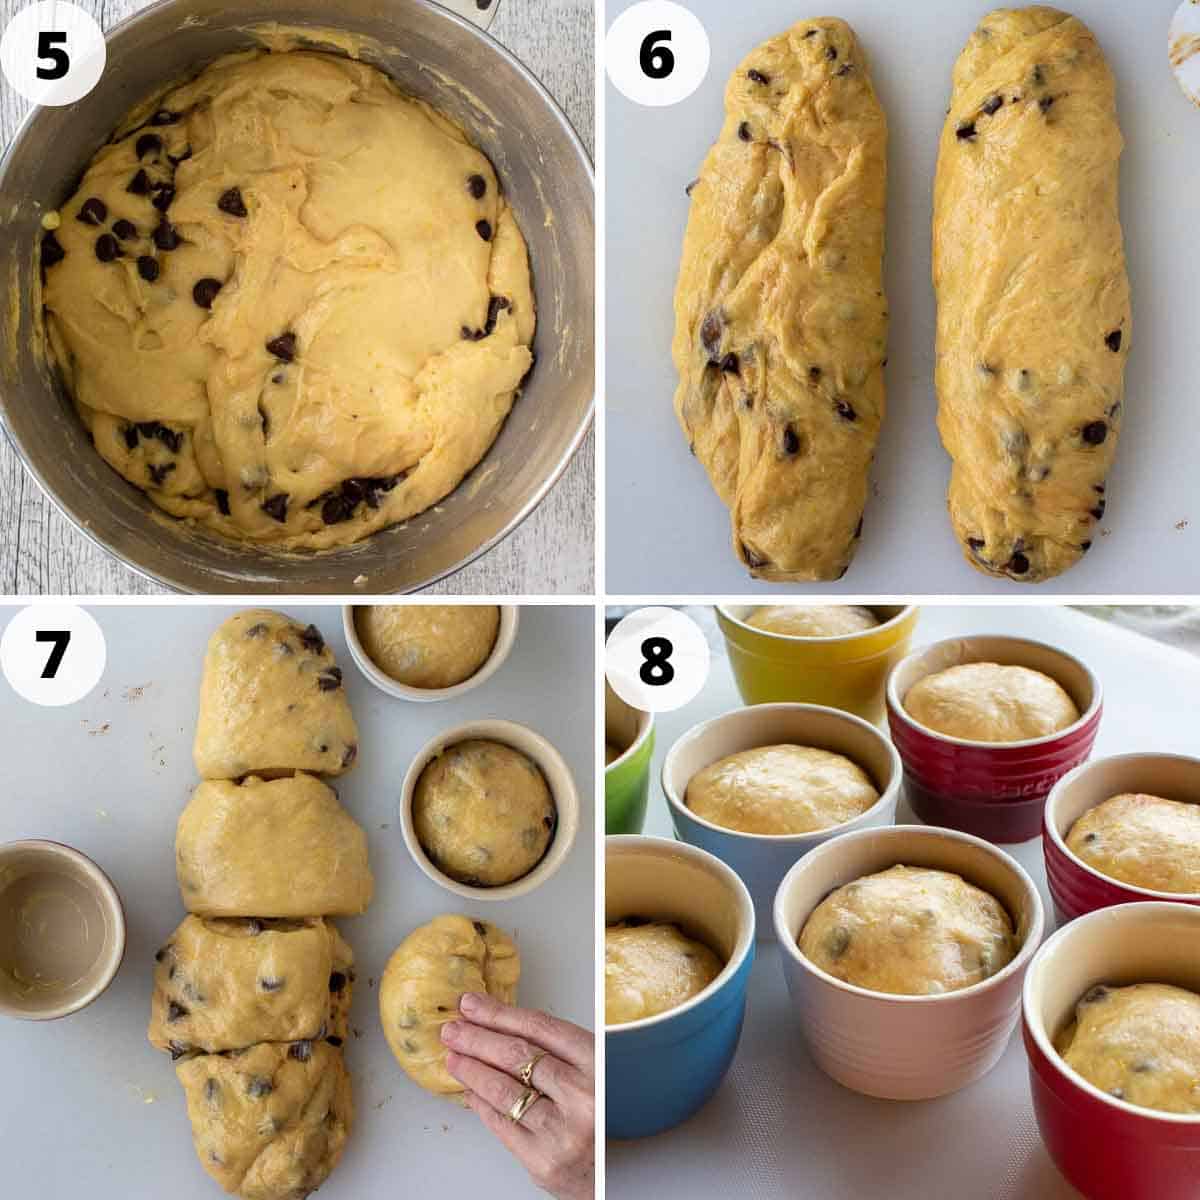 Four step process showing how to shape these sweet holiday breads.